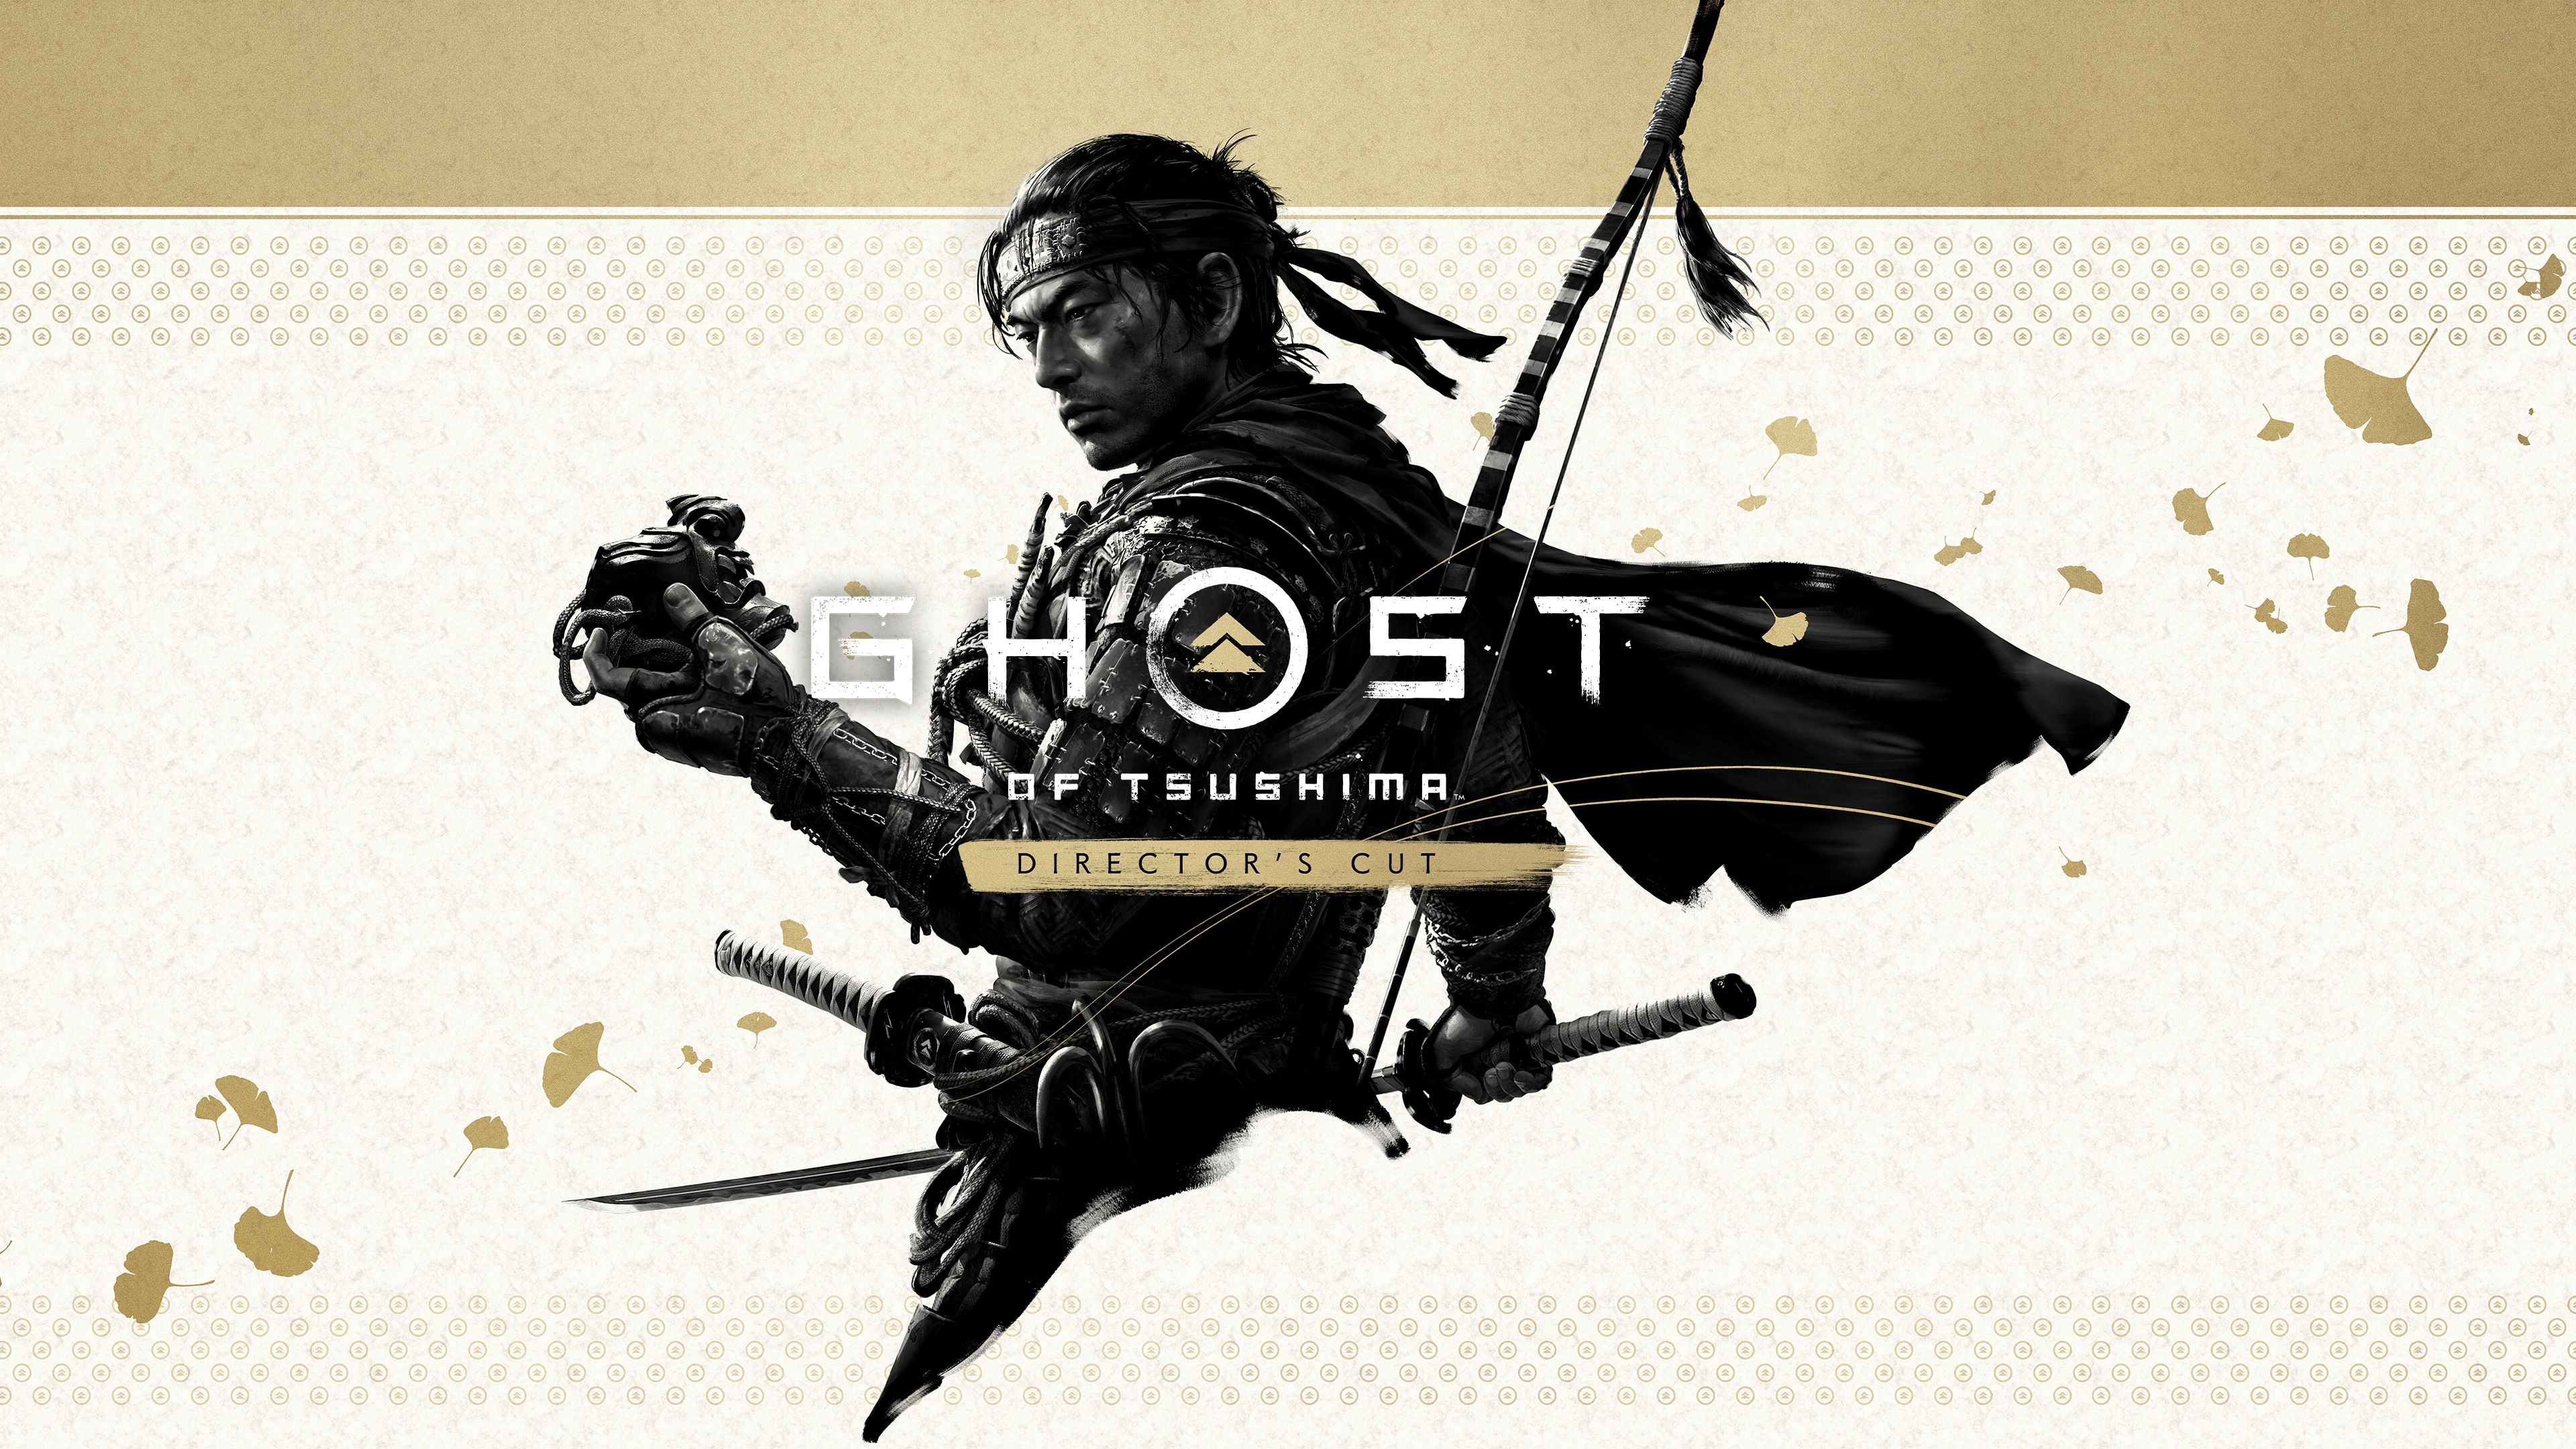 PlayStation Store Spring Sale 2022: Ghost of Tsushima Director's Cut, NBA  2K22, More Games Available for Discount - MySmartPrice